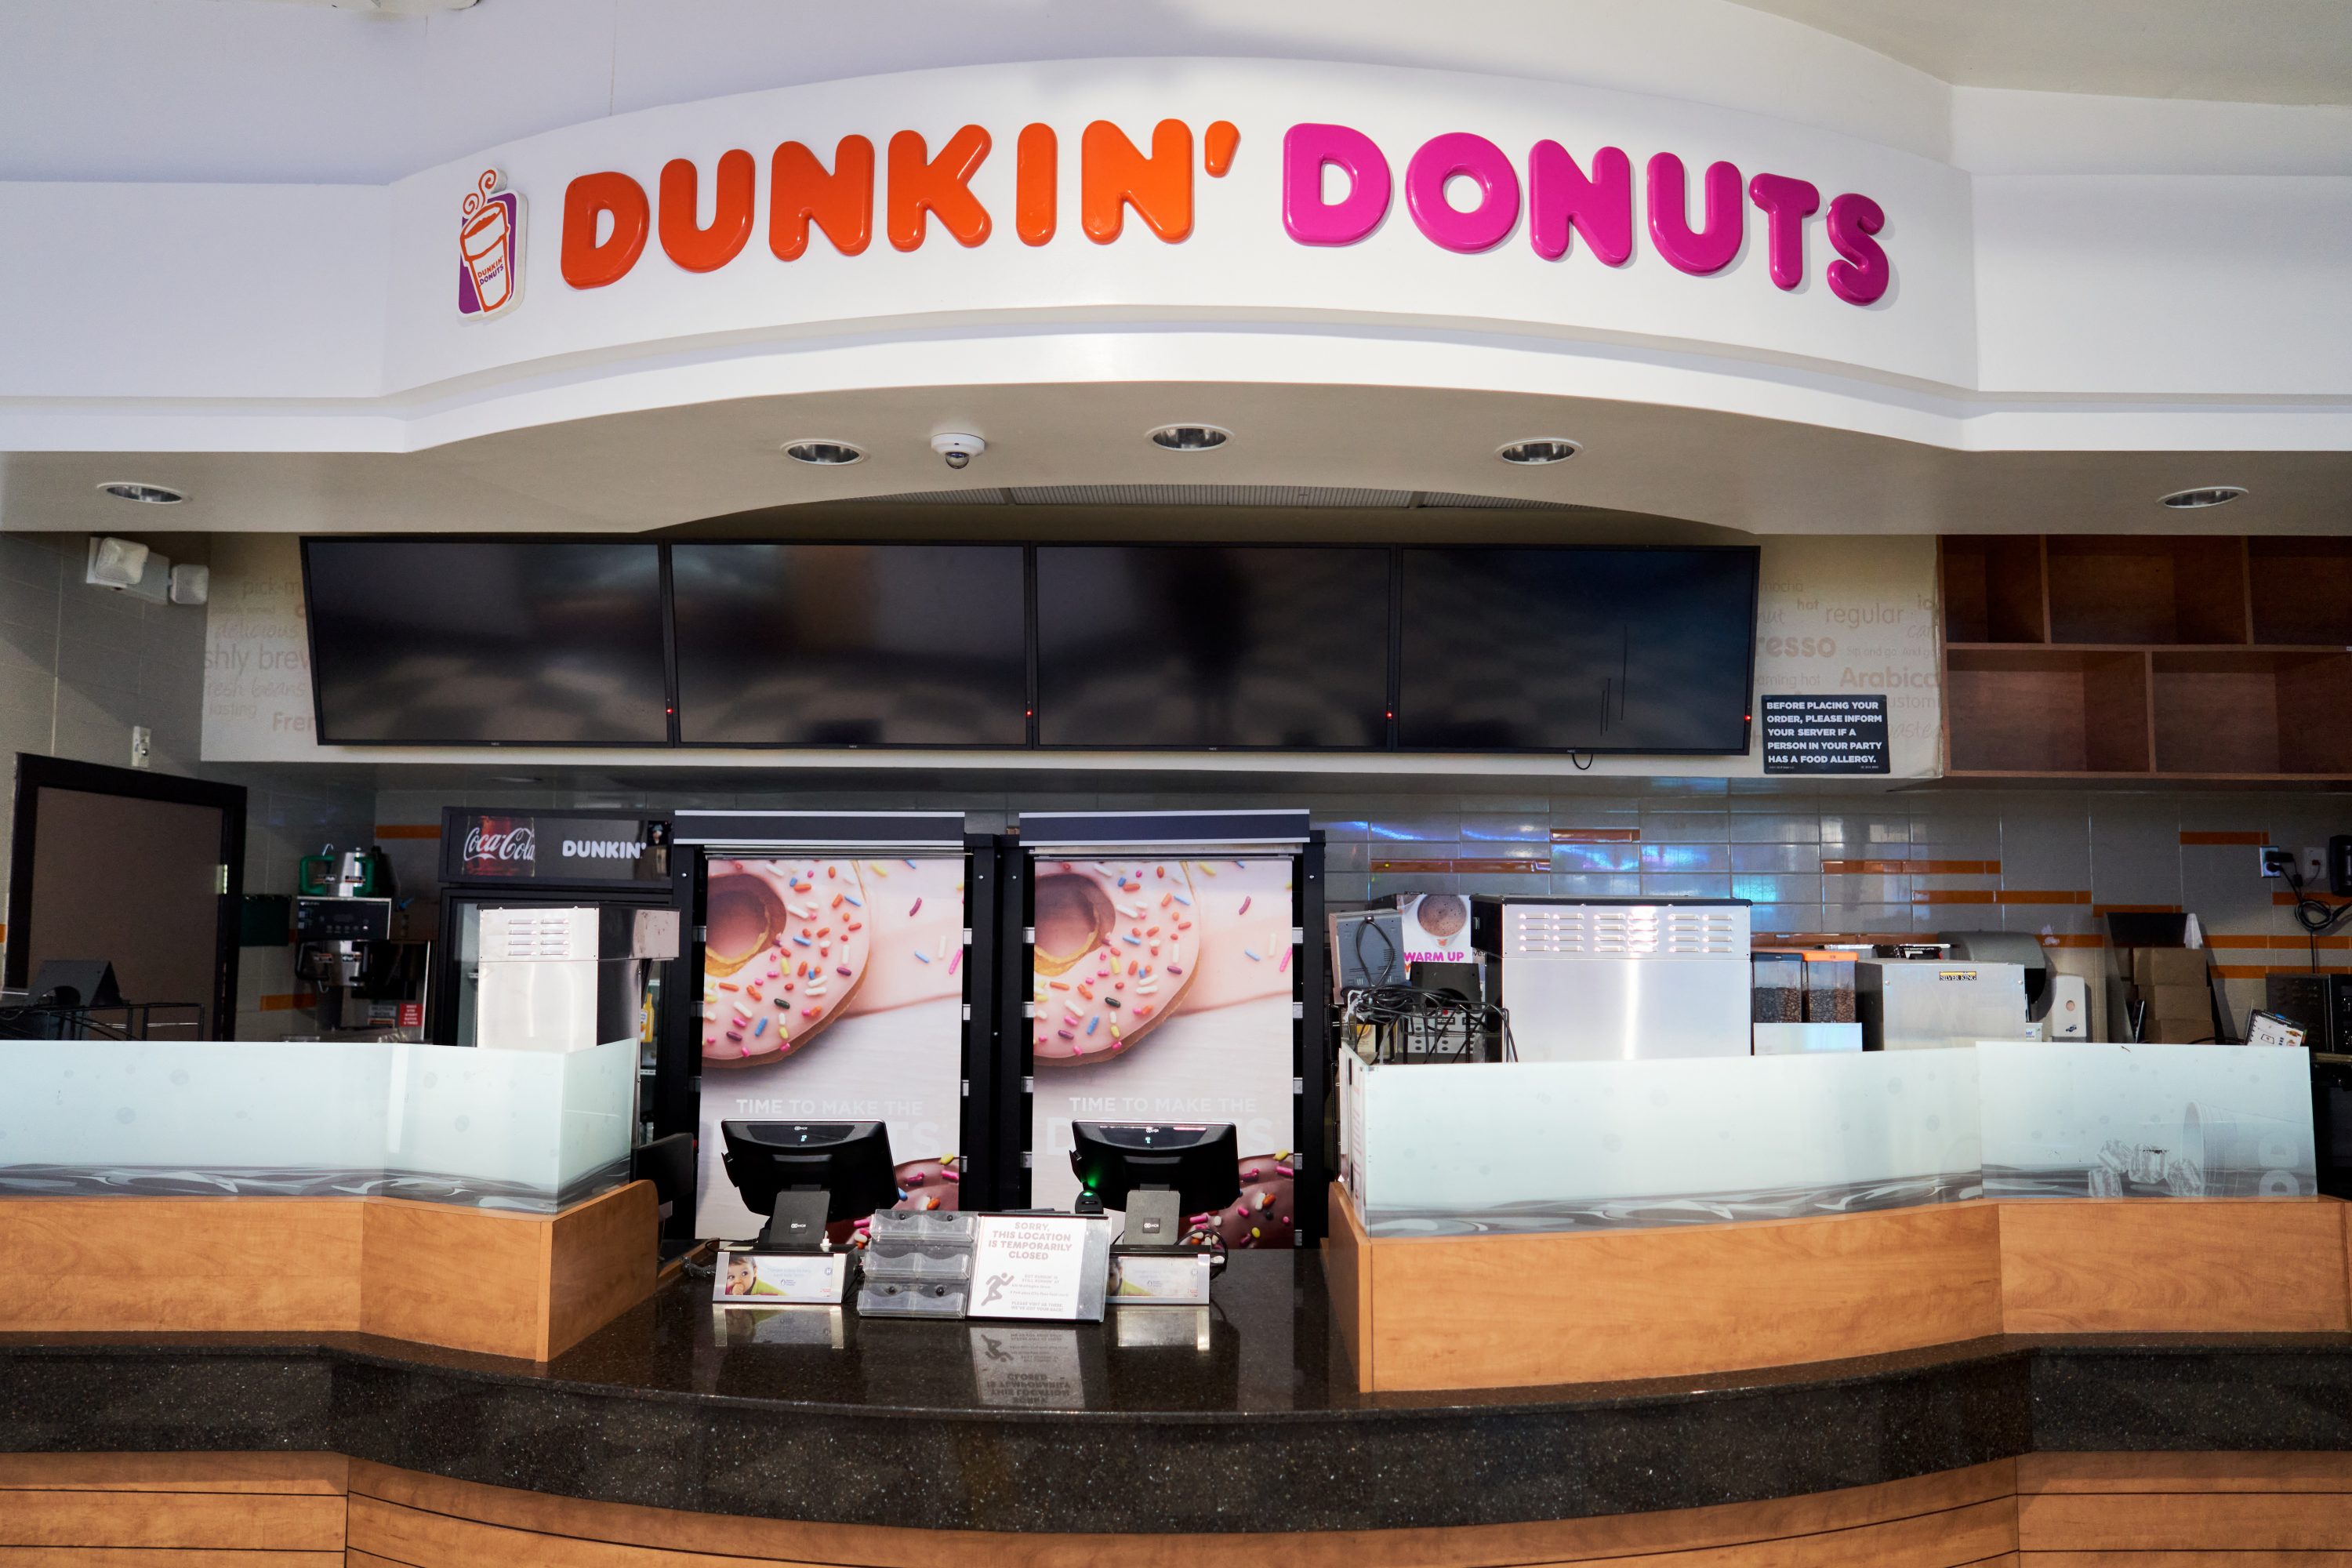 Photography of Boston's iconic restaurant...a Dunkin' Donuts.